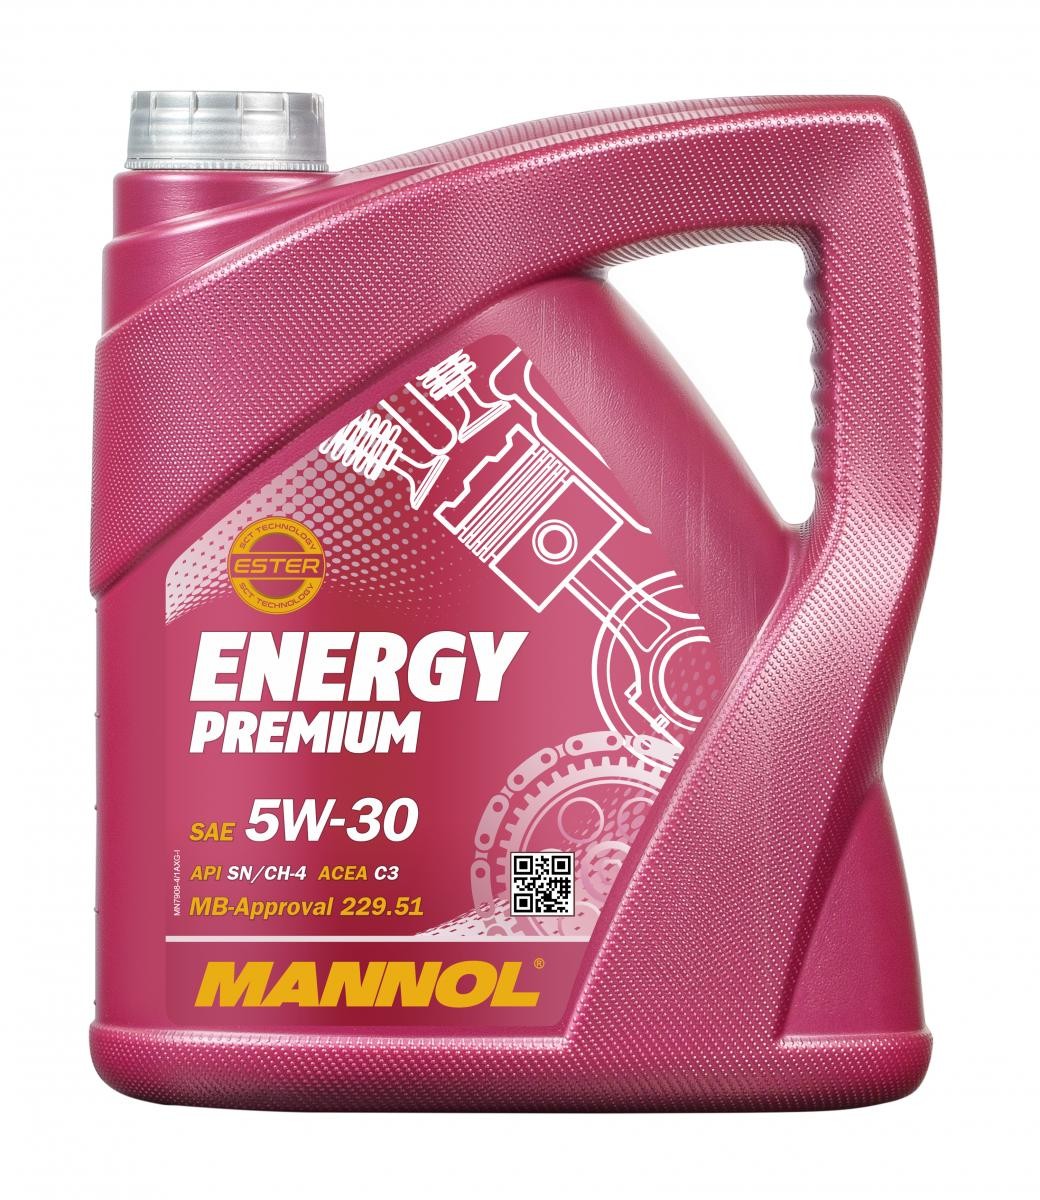 MN7908-4 MANNOL Oil VOLVO 5W-30, 4l, Synthetic Oil